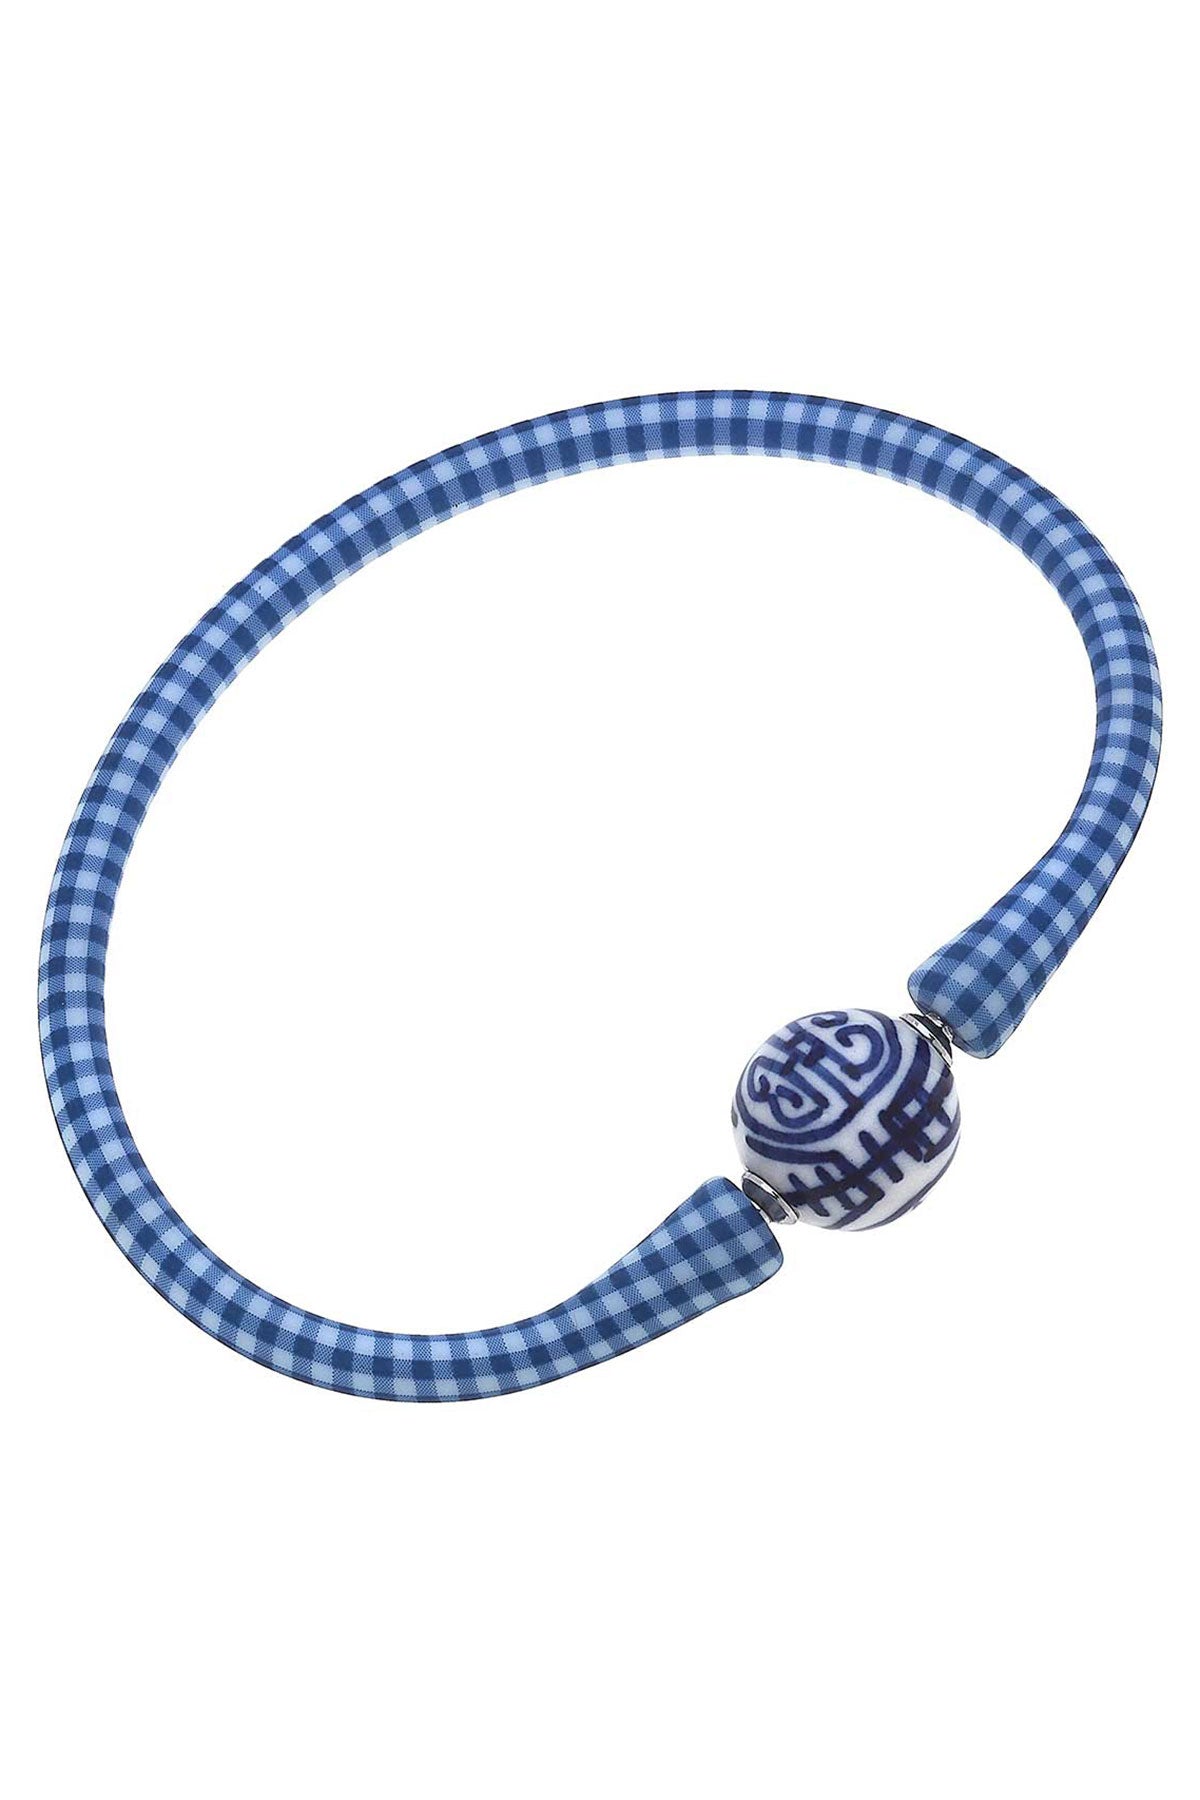 Bali Chinoiserie Bead Silicone Bracelet in Blue Gingham